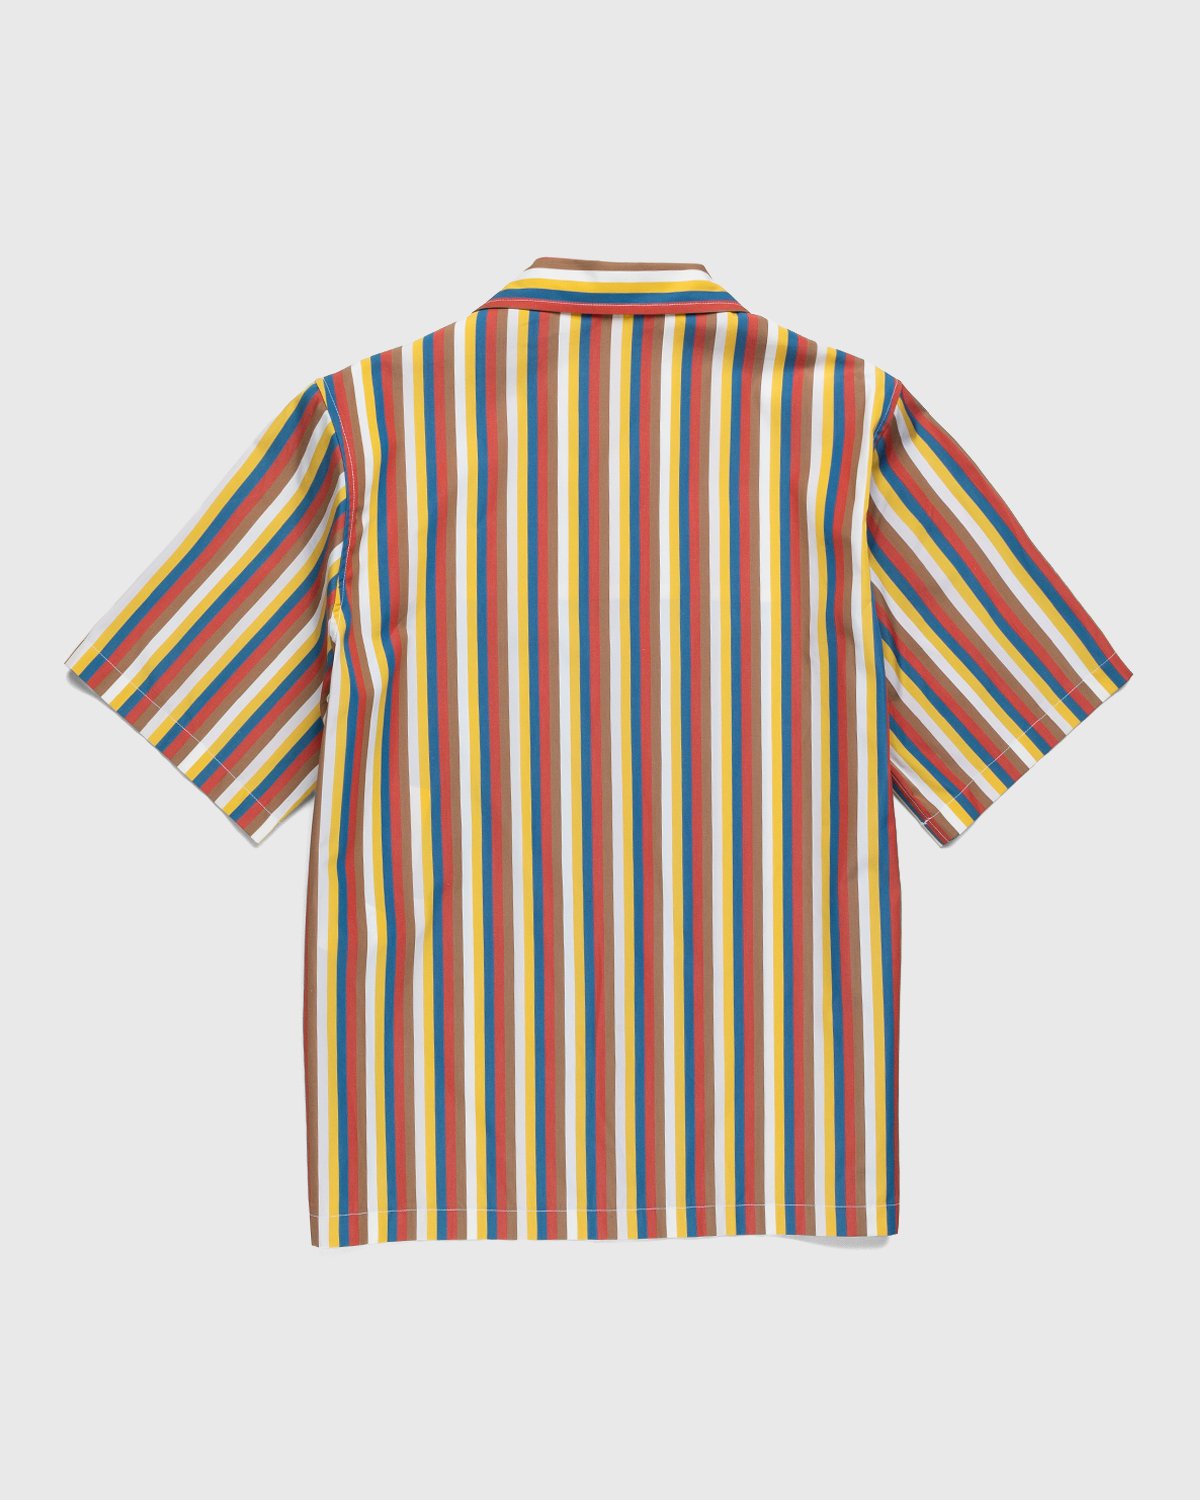 Jil Sander - Striped Vacation Shirt Red/White - Clothing - Red - Image 2